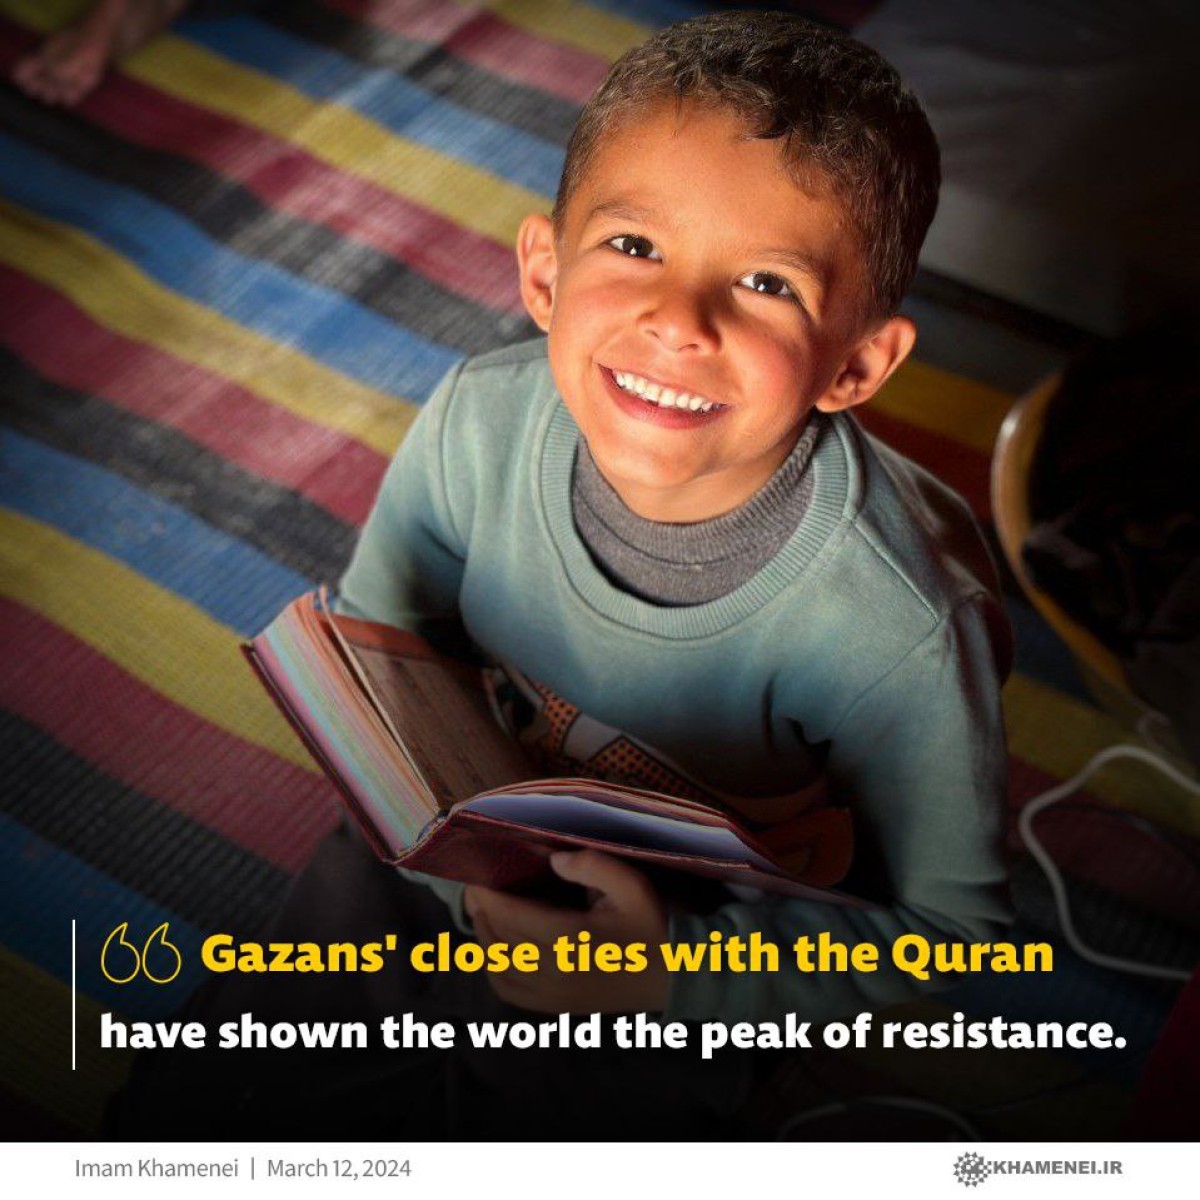 Gazans' close ties with the Quran have shown the world the peak of resistance.